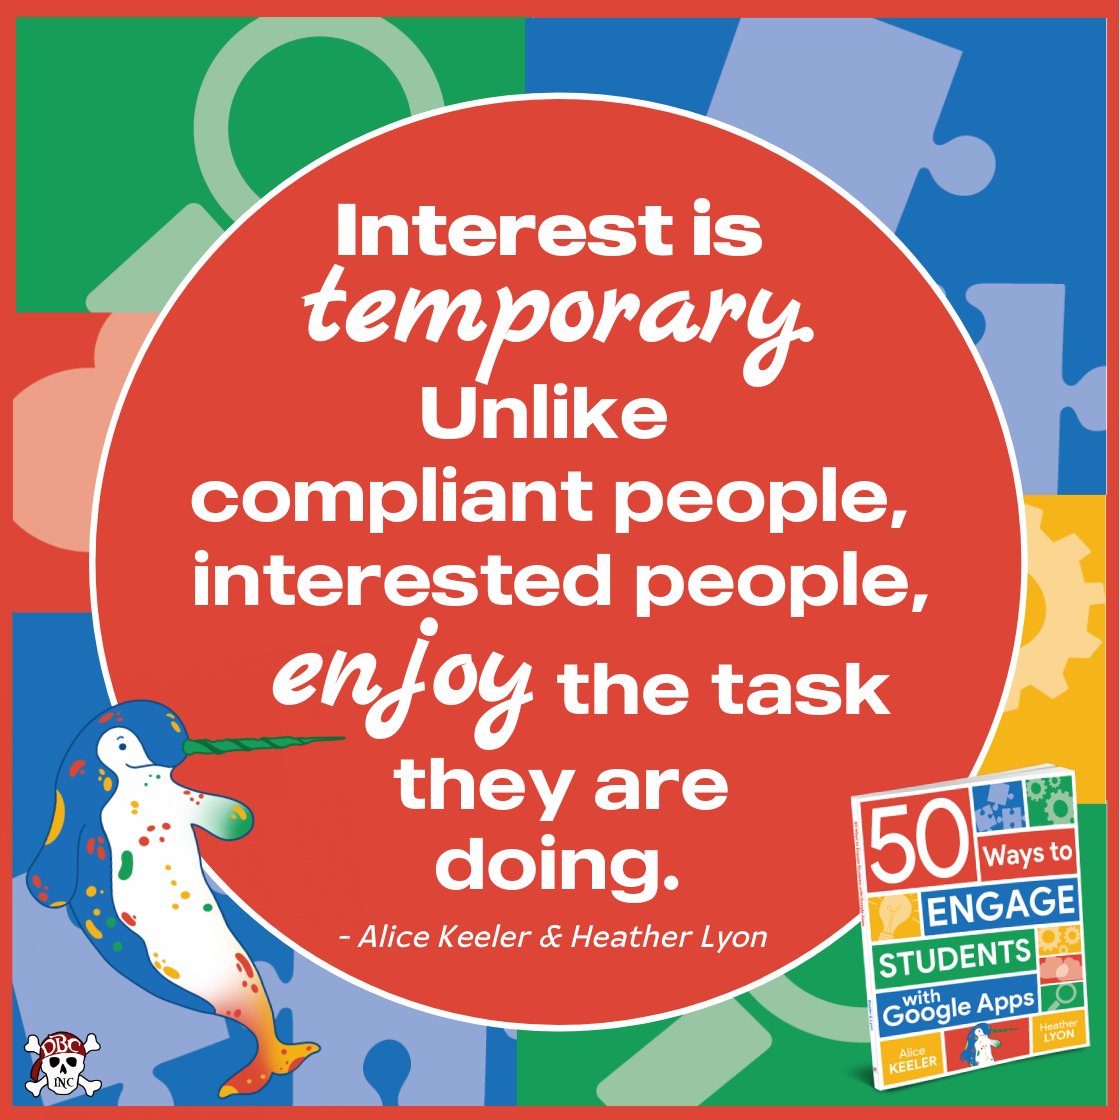 Are your learners interested or compliant? 50 Ways to Engage Students with Google Apps w/Alice Keeler & Heather Lyon 📖 amazon.com/Ways-Engage-St… #tlap #dbcincbooks @burgessdave @TaraMartinEDU @alicekeeler @LyonsLetters